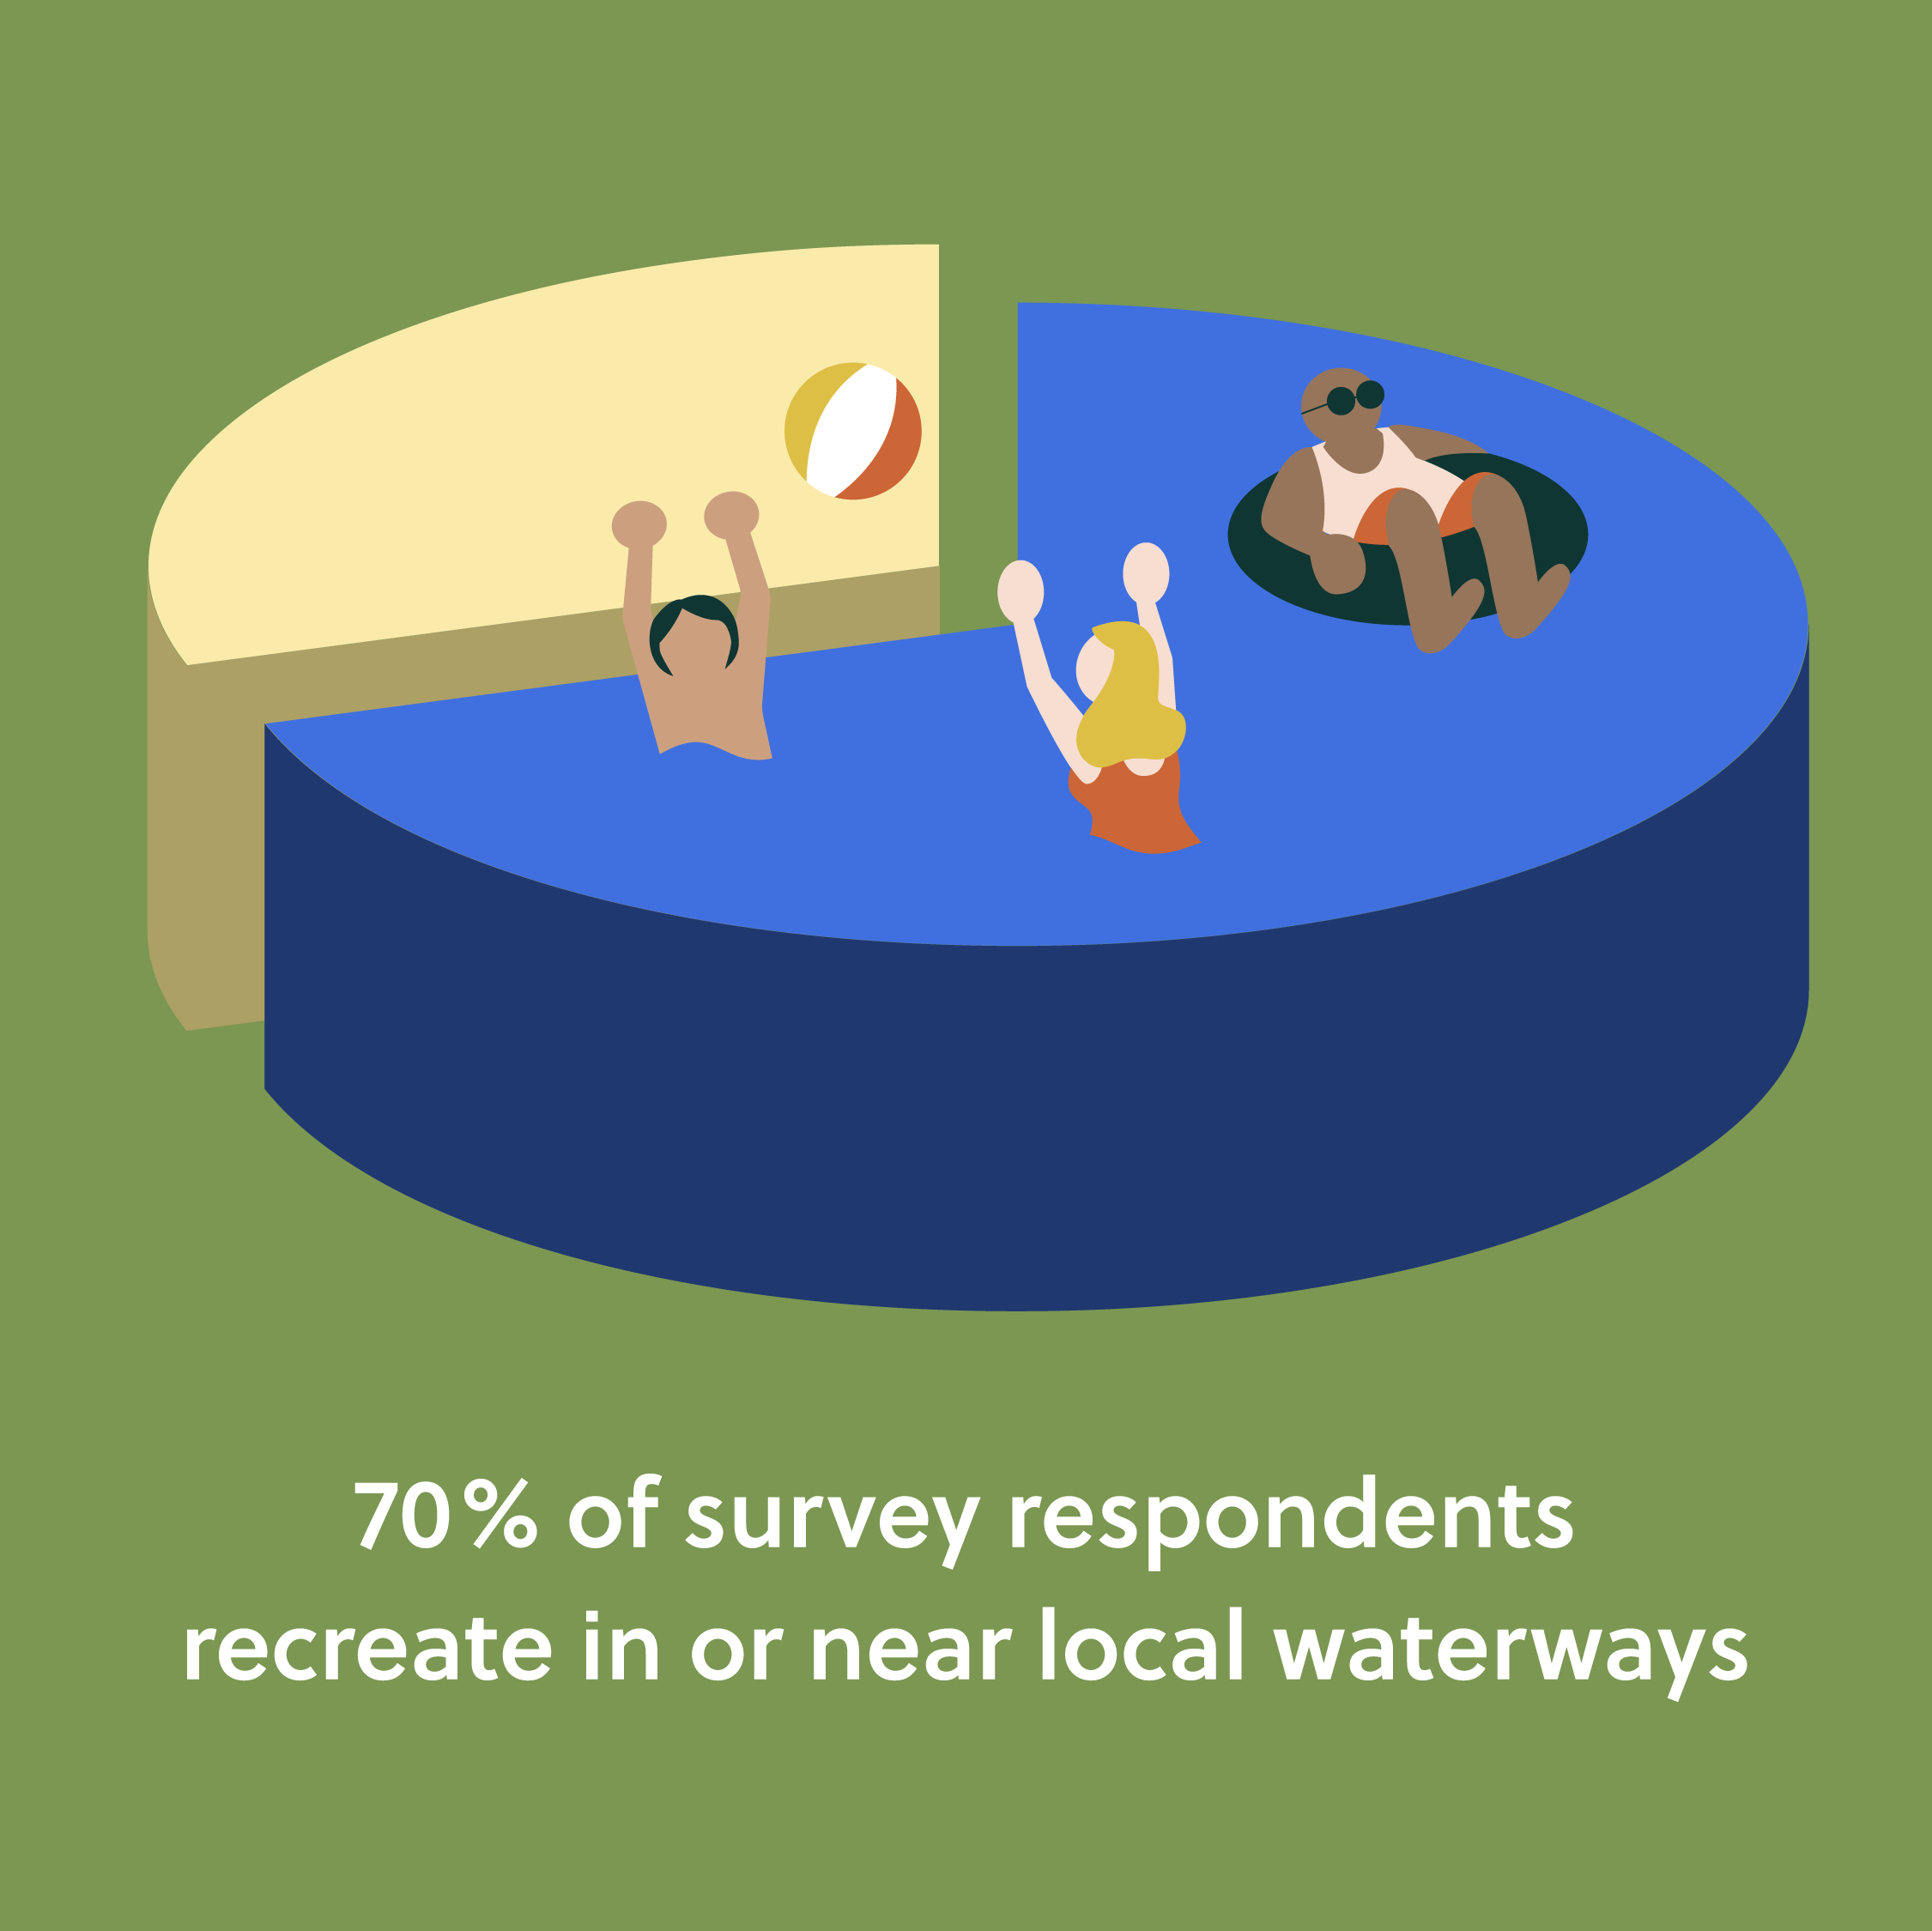 An infographic demonstrating that 70% of survey respondents recreate in or near local waterways